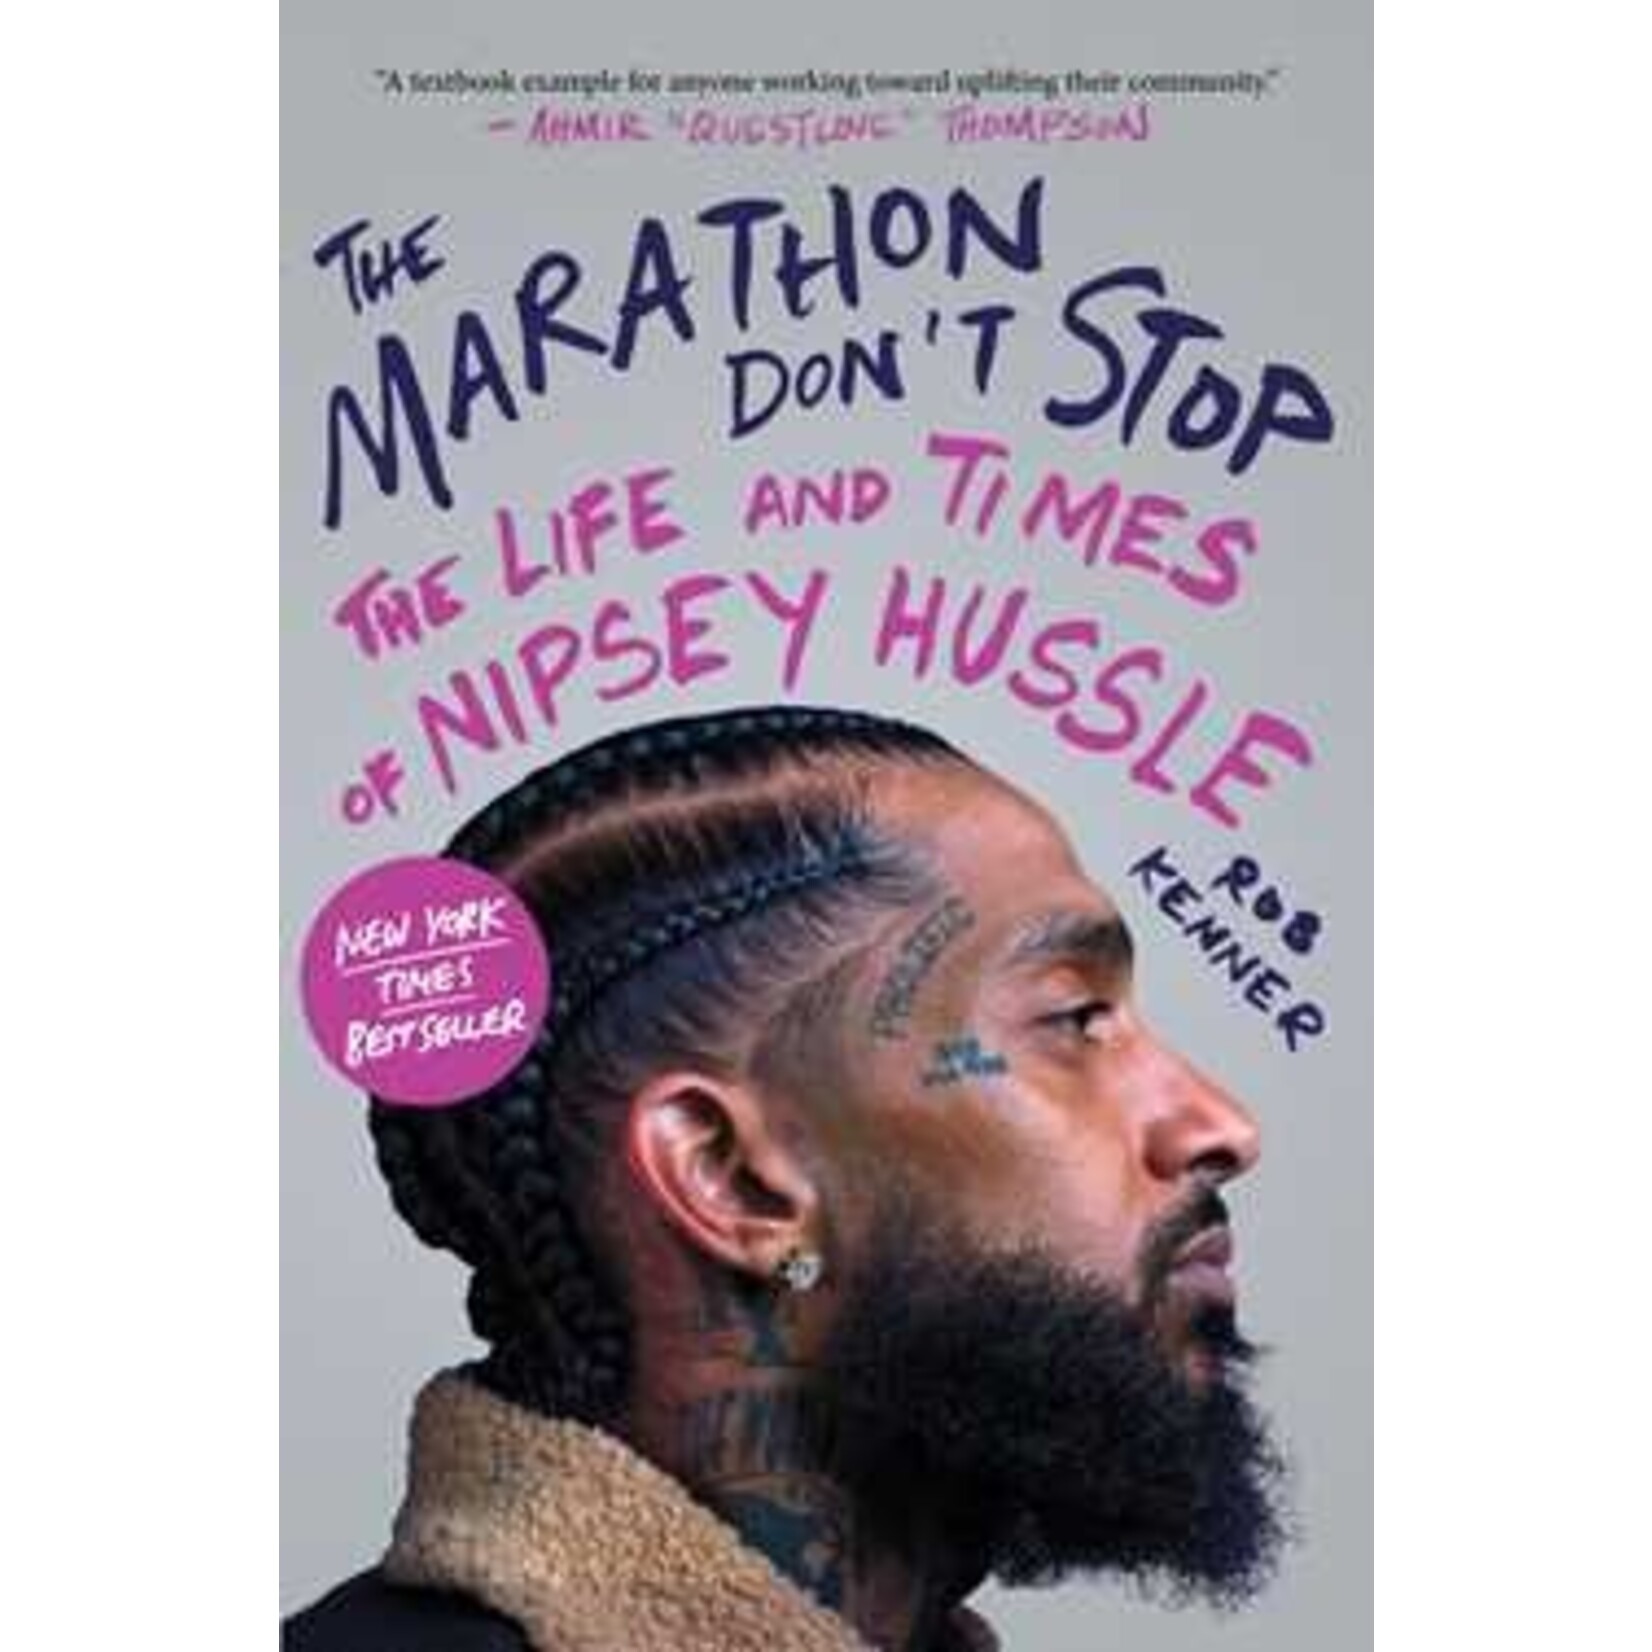 Nipsey Hussle - The Marathon Don't Stop: The Life And Times Of Nipsey Hussle [Book]